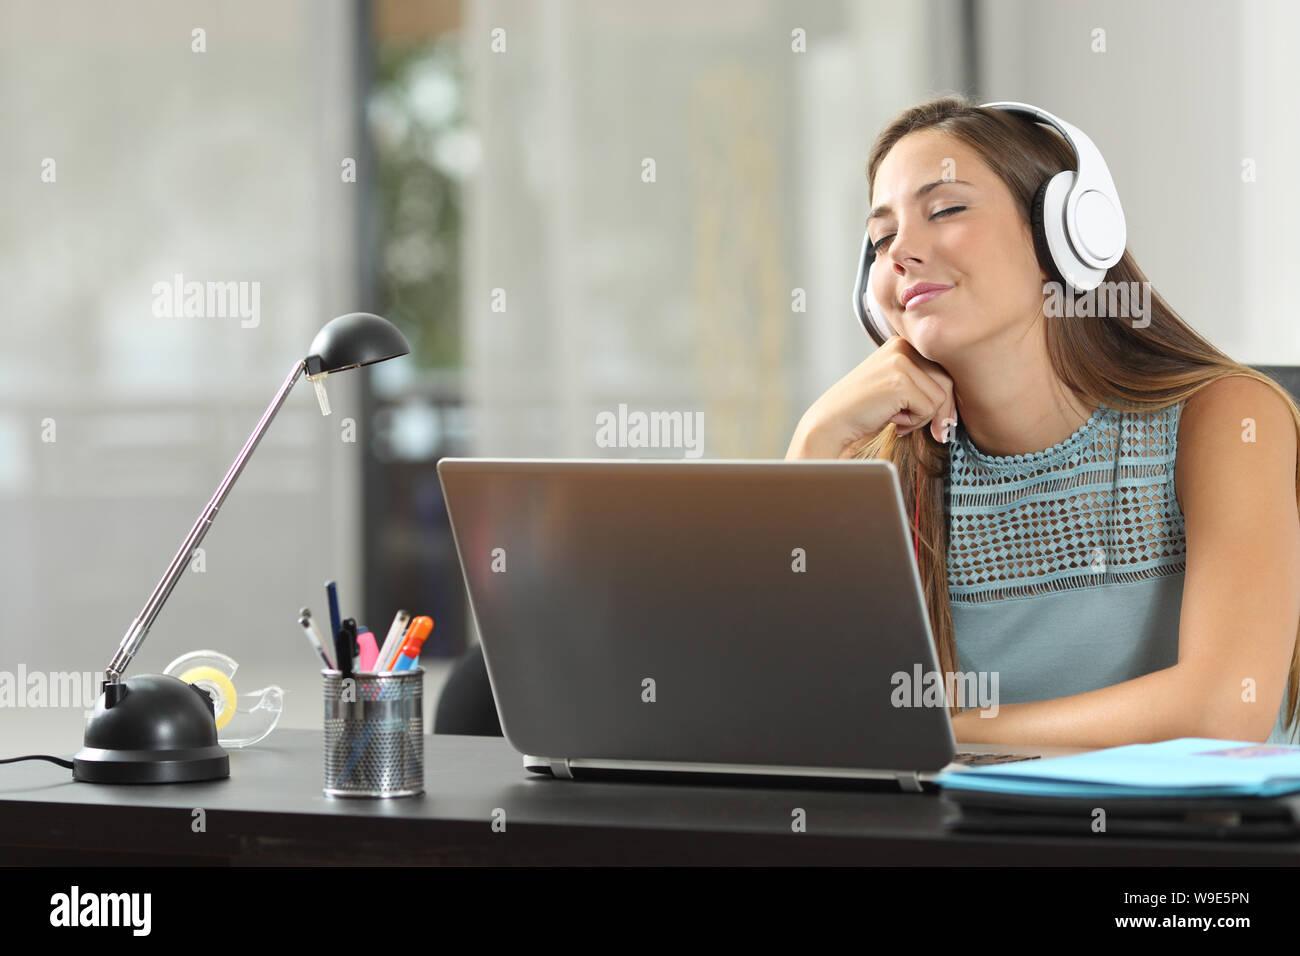 Happy girl listening to music wearing headphones in a room Stock Photo